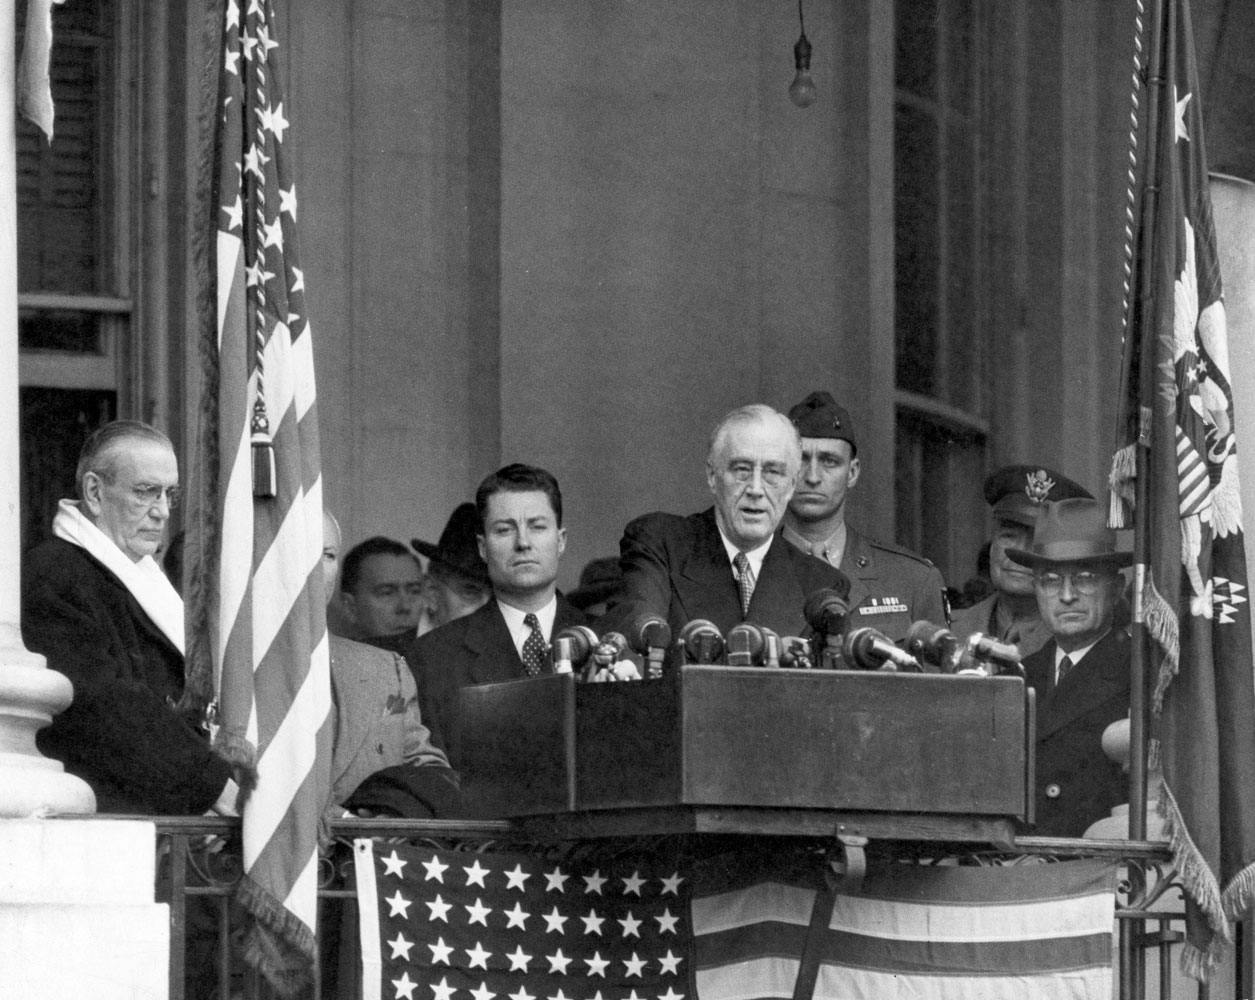 Vice President Harry S. Truman (right) sits in the background as President Franklin D. Roosevelt delivers his fourth inaugural address, 1945.